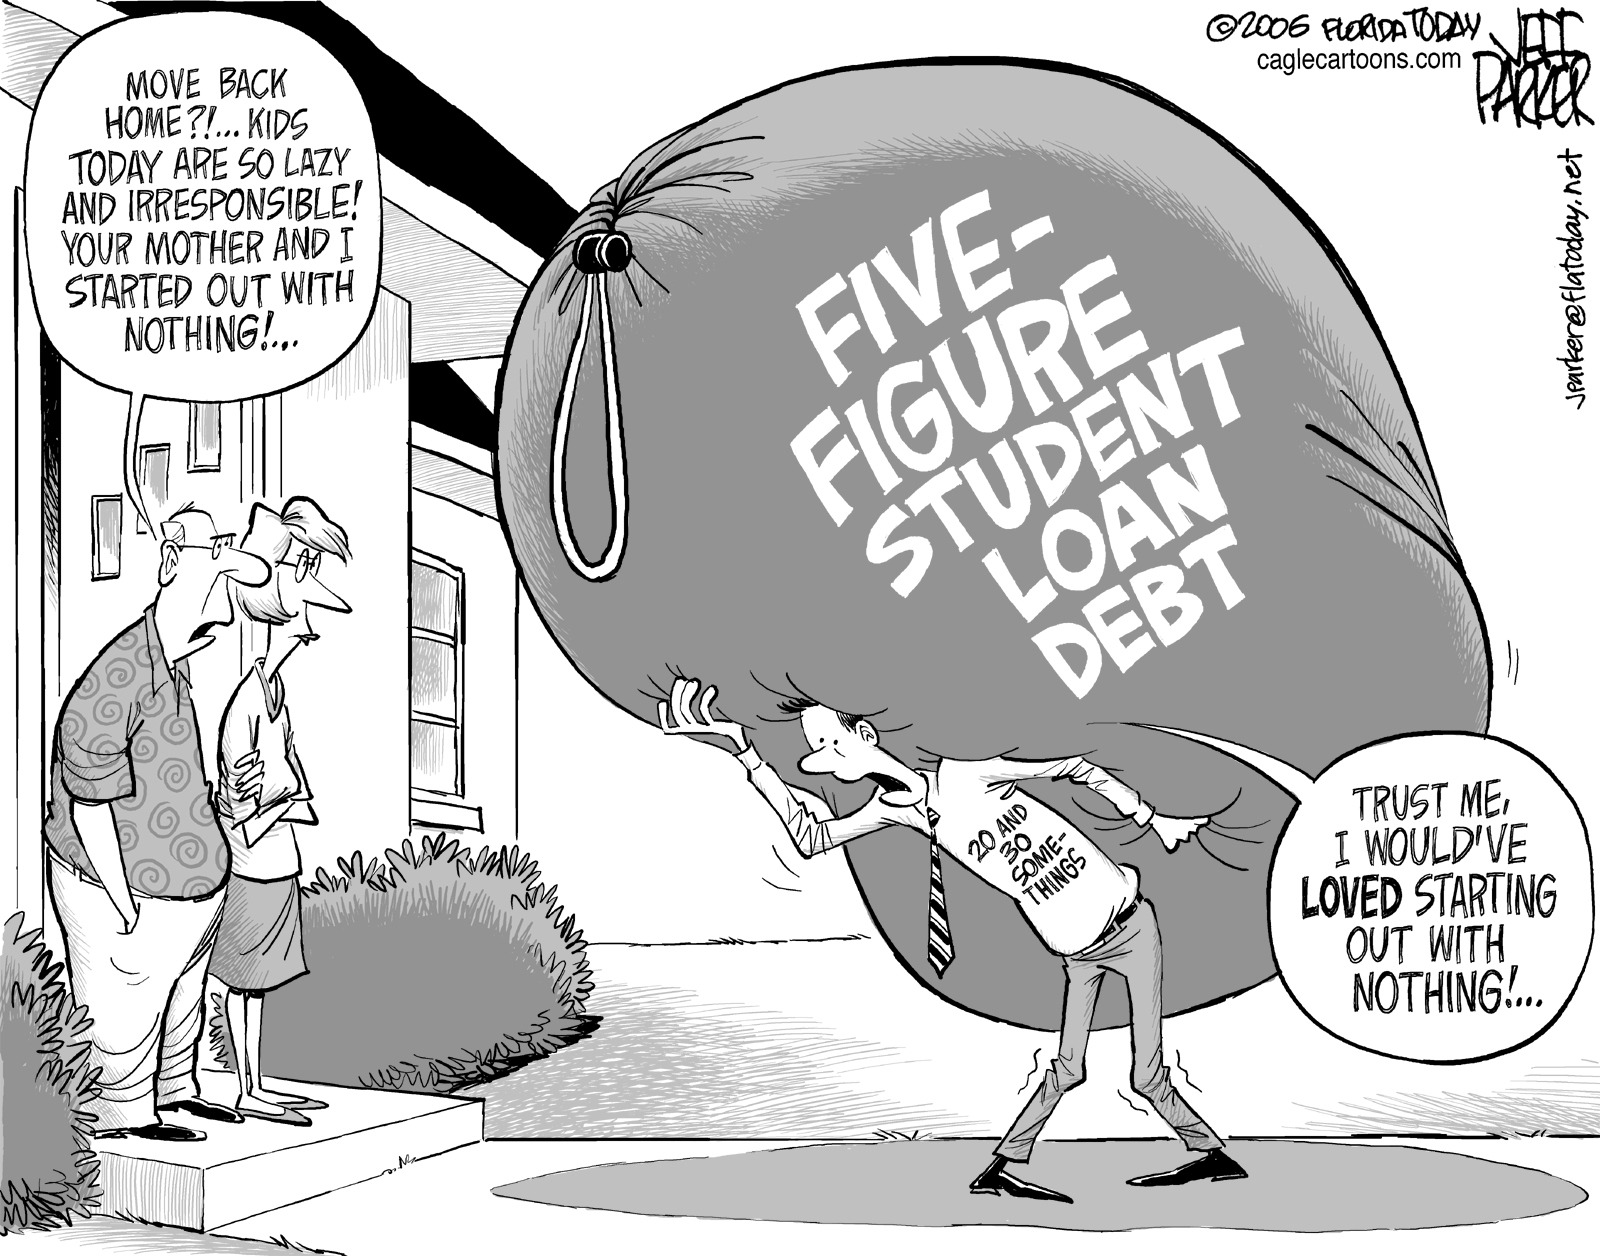 Do the Millennial’s Care about the Debt?